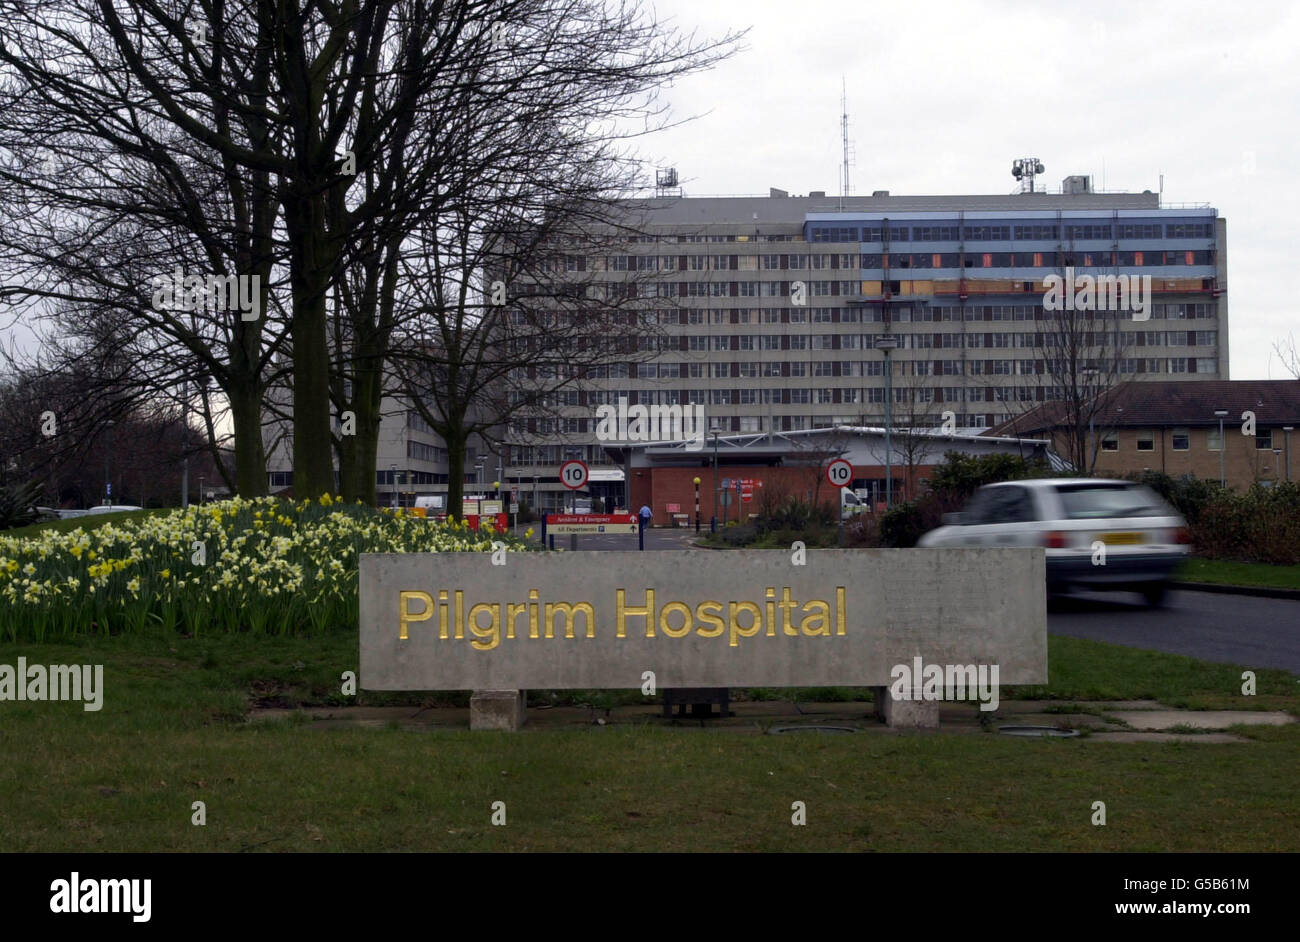 Pilgrim Hospital in Boston, Lincolnshire, March 26 2001, where hospital consultant Dr Mohammed Al-Fallouji was suspended after he blew the whistle on alleged serious incidents of medical malpractice. Stock Photo